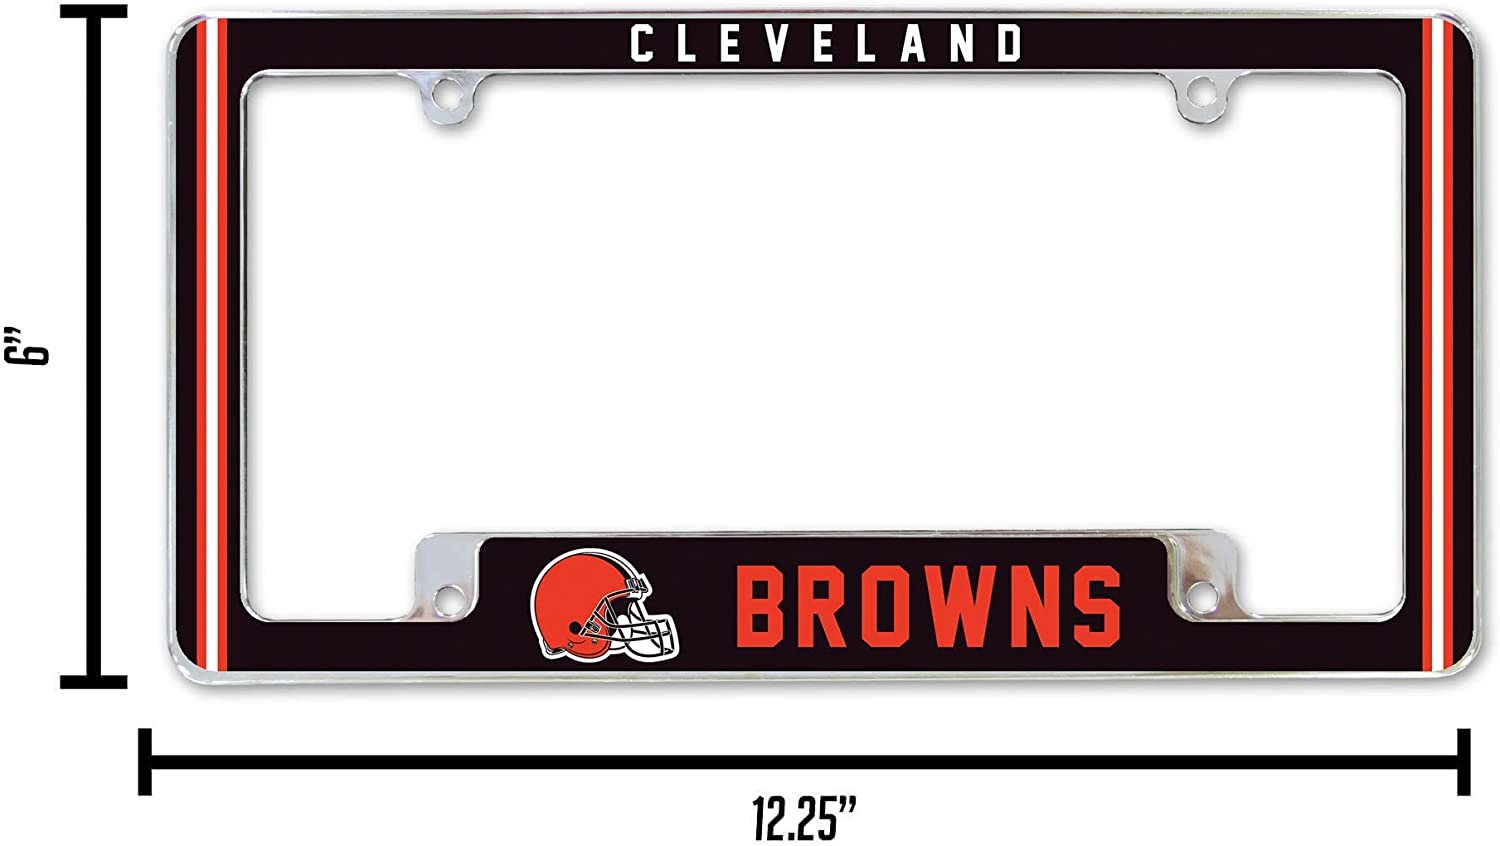 Cleveland Browns Metal License Plate Frame Chrome Tag Cover Alternate Design 6x12 Inch